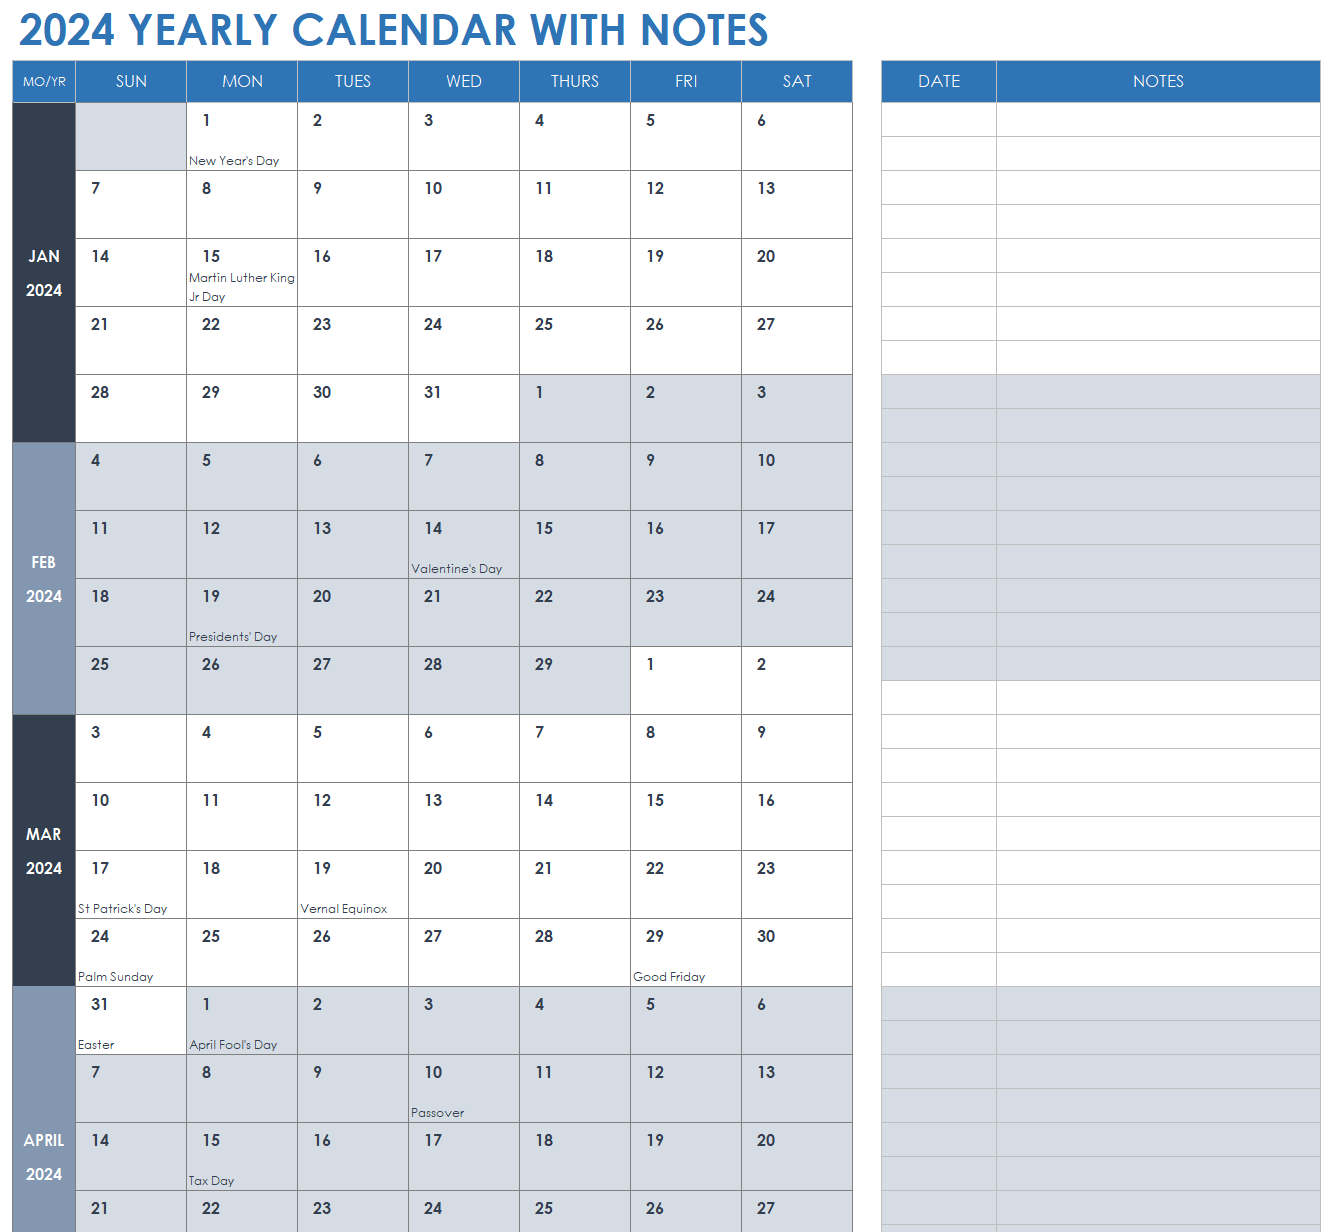 2024 Yearly Calendar with Notes